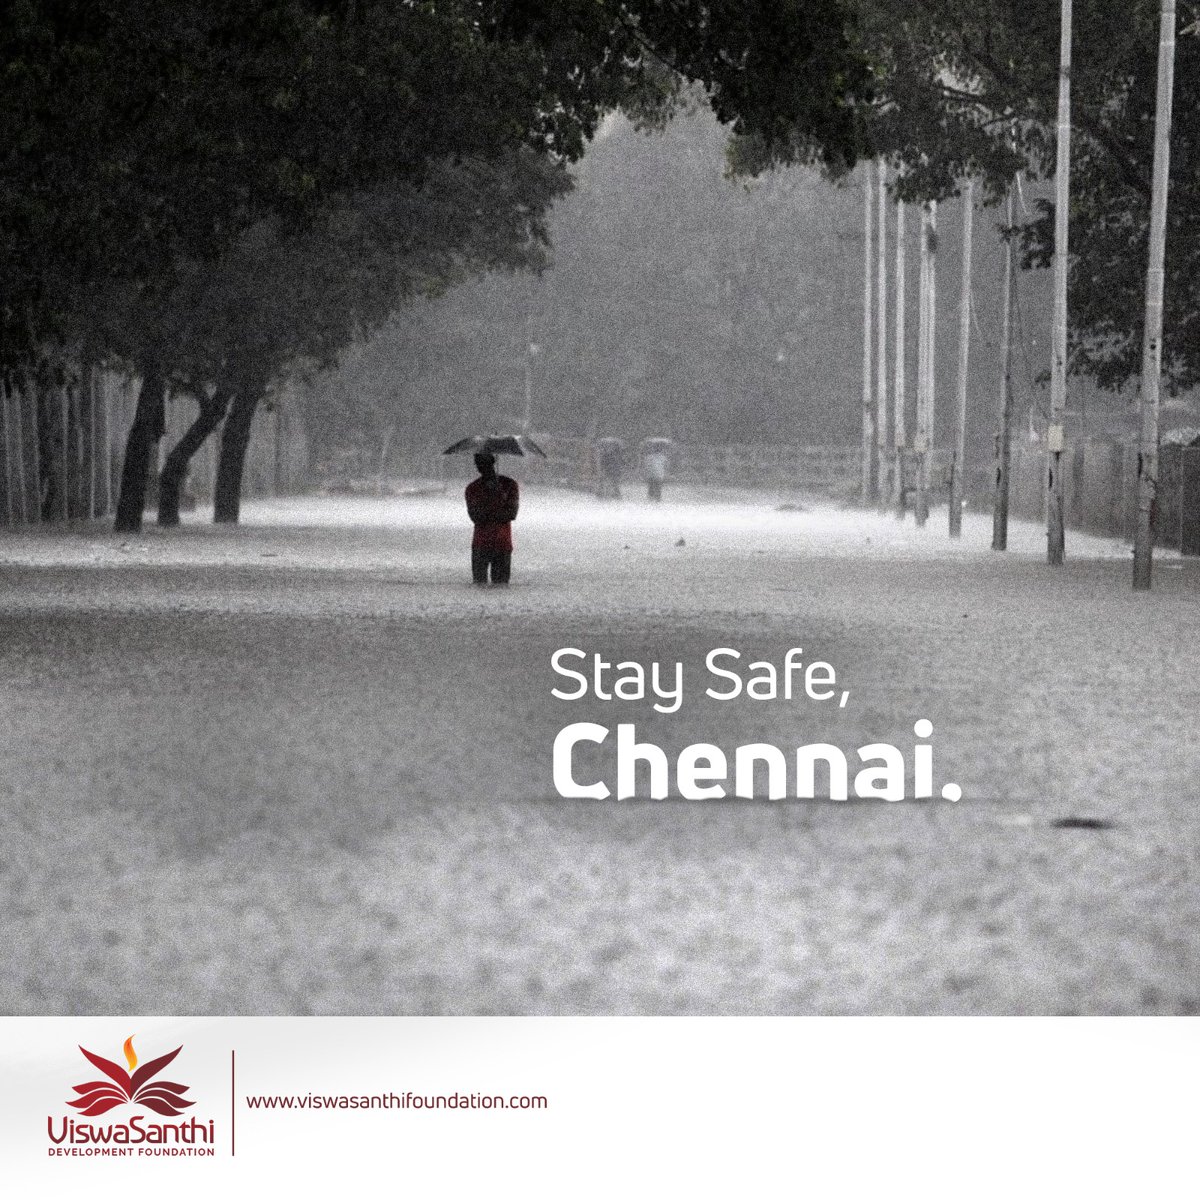 Together, we stand resilient, offering support and compassion to those affected. Let's extend a helping hand and prioritize the well-being of those affected. Stay safe, #chennai. #mohanlal #viswasanthifoundation #StaySafeChennai #flood #rain #CycloneMichaung #storm #tamilnadu